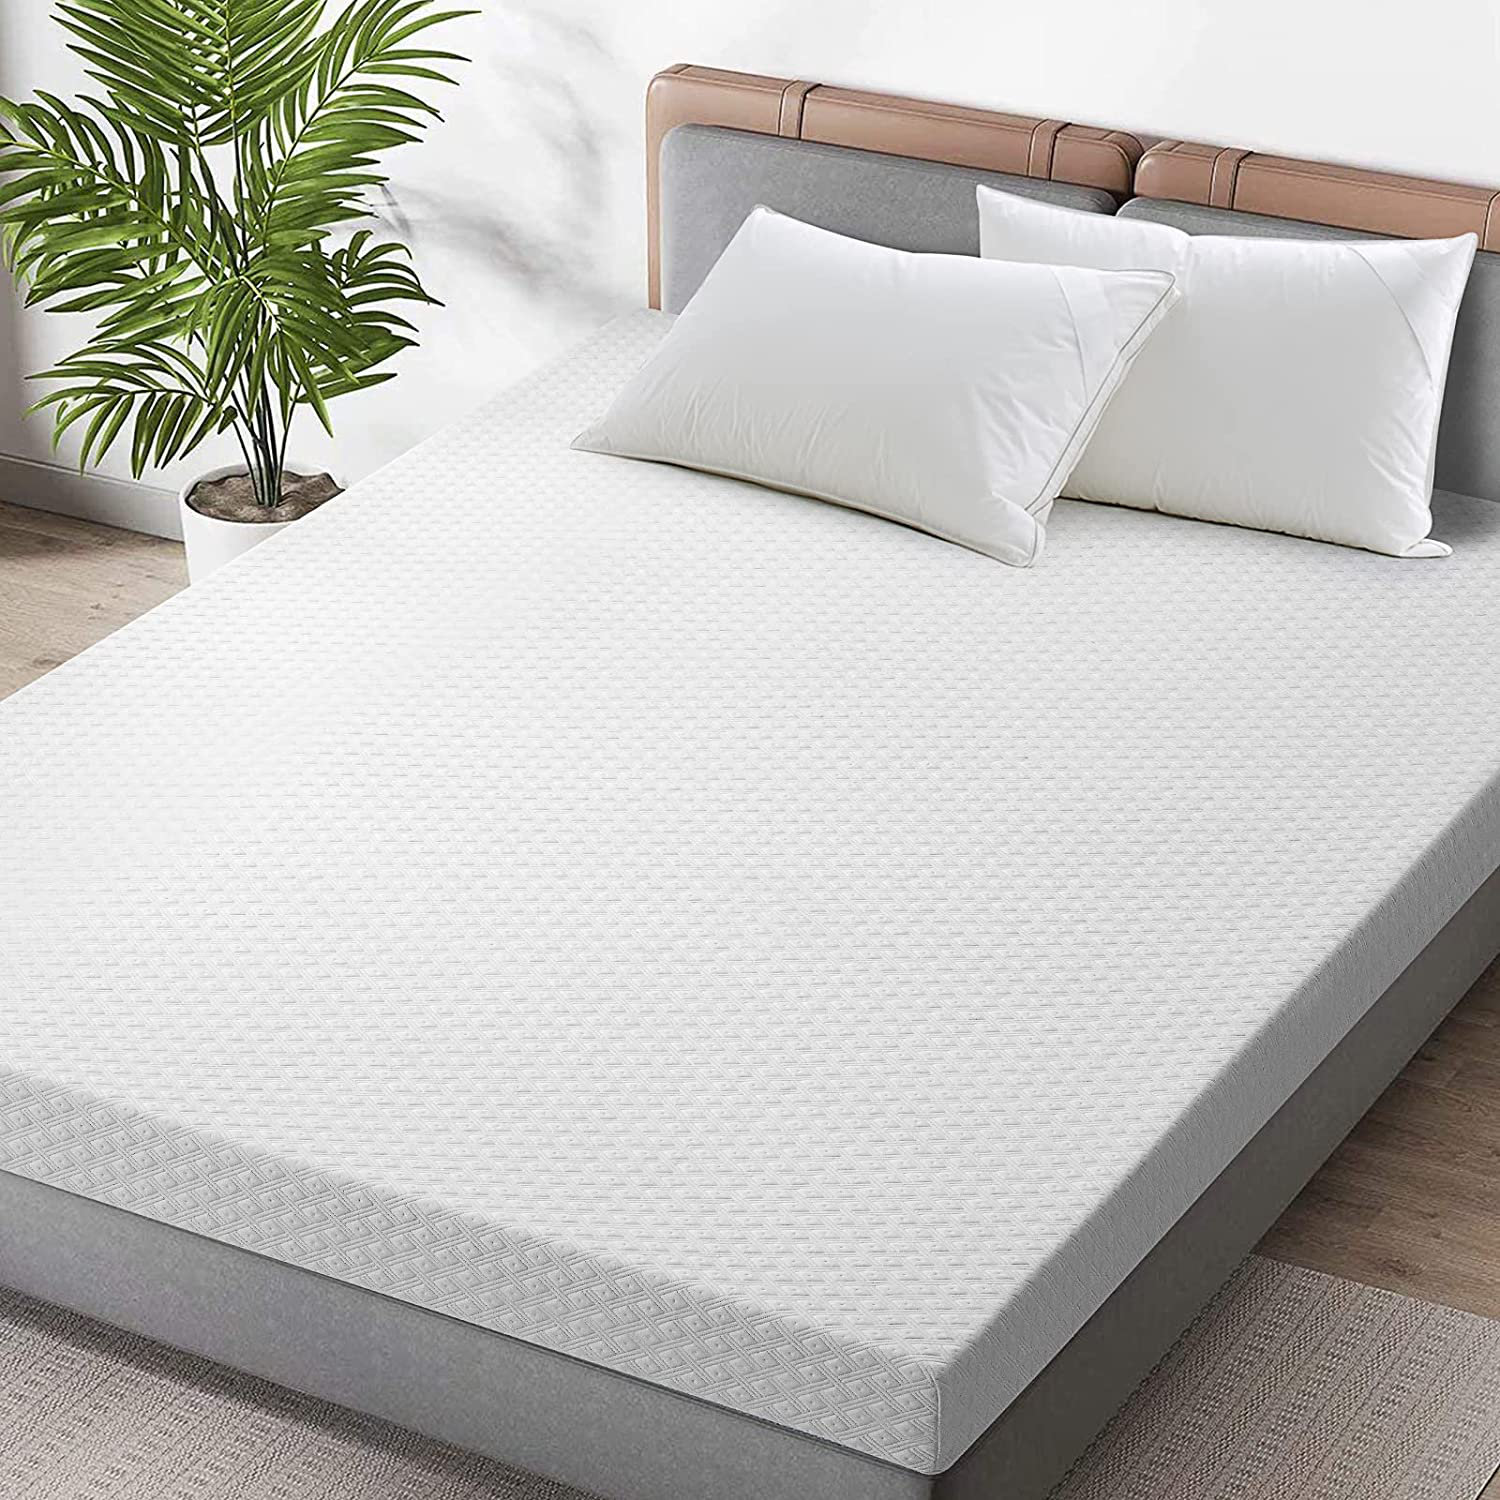 Quilted Fitted Mattress Pad Non-Skid Waterproof Fitted Sheet Mattress  Protector with Highly Absorbent Fill Layer Cotton Blend Cover Surface